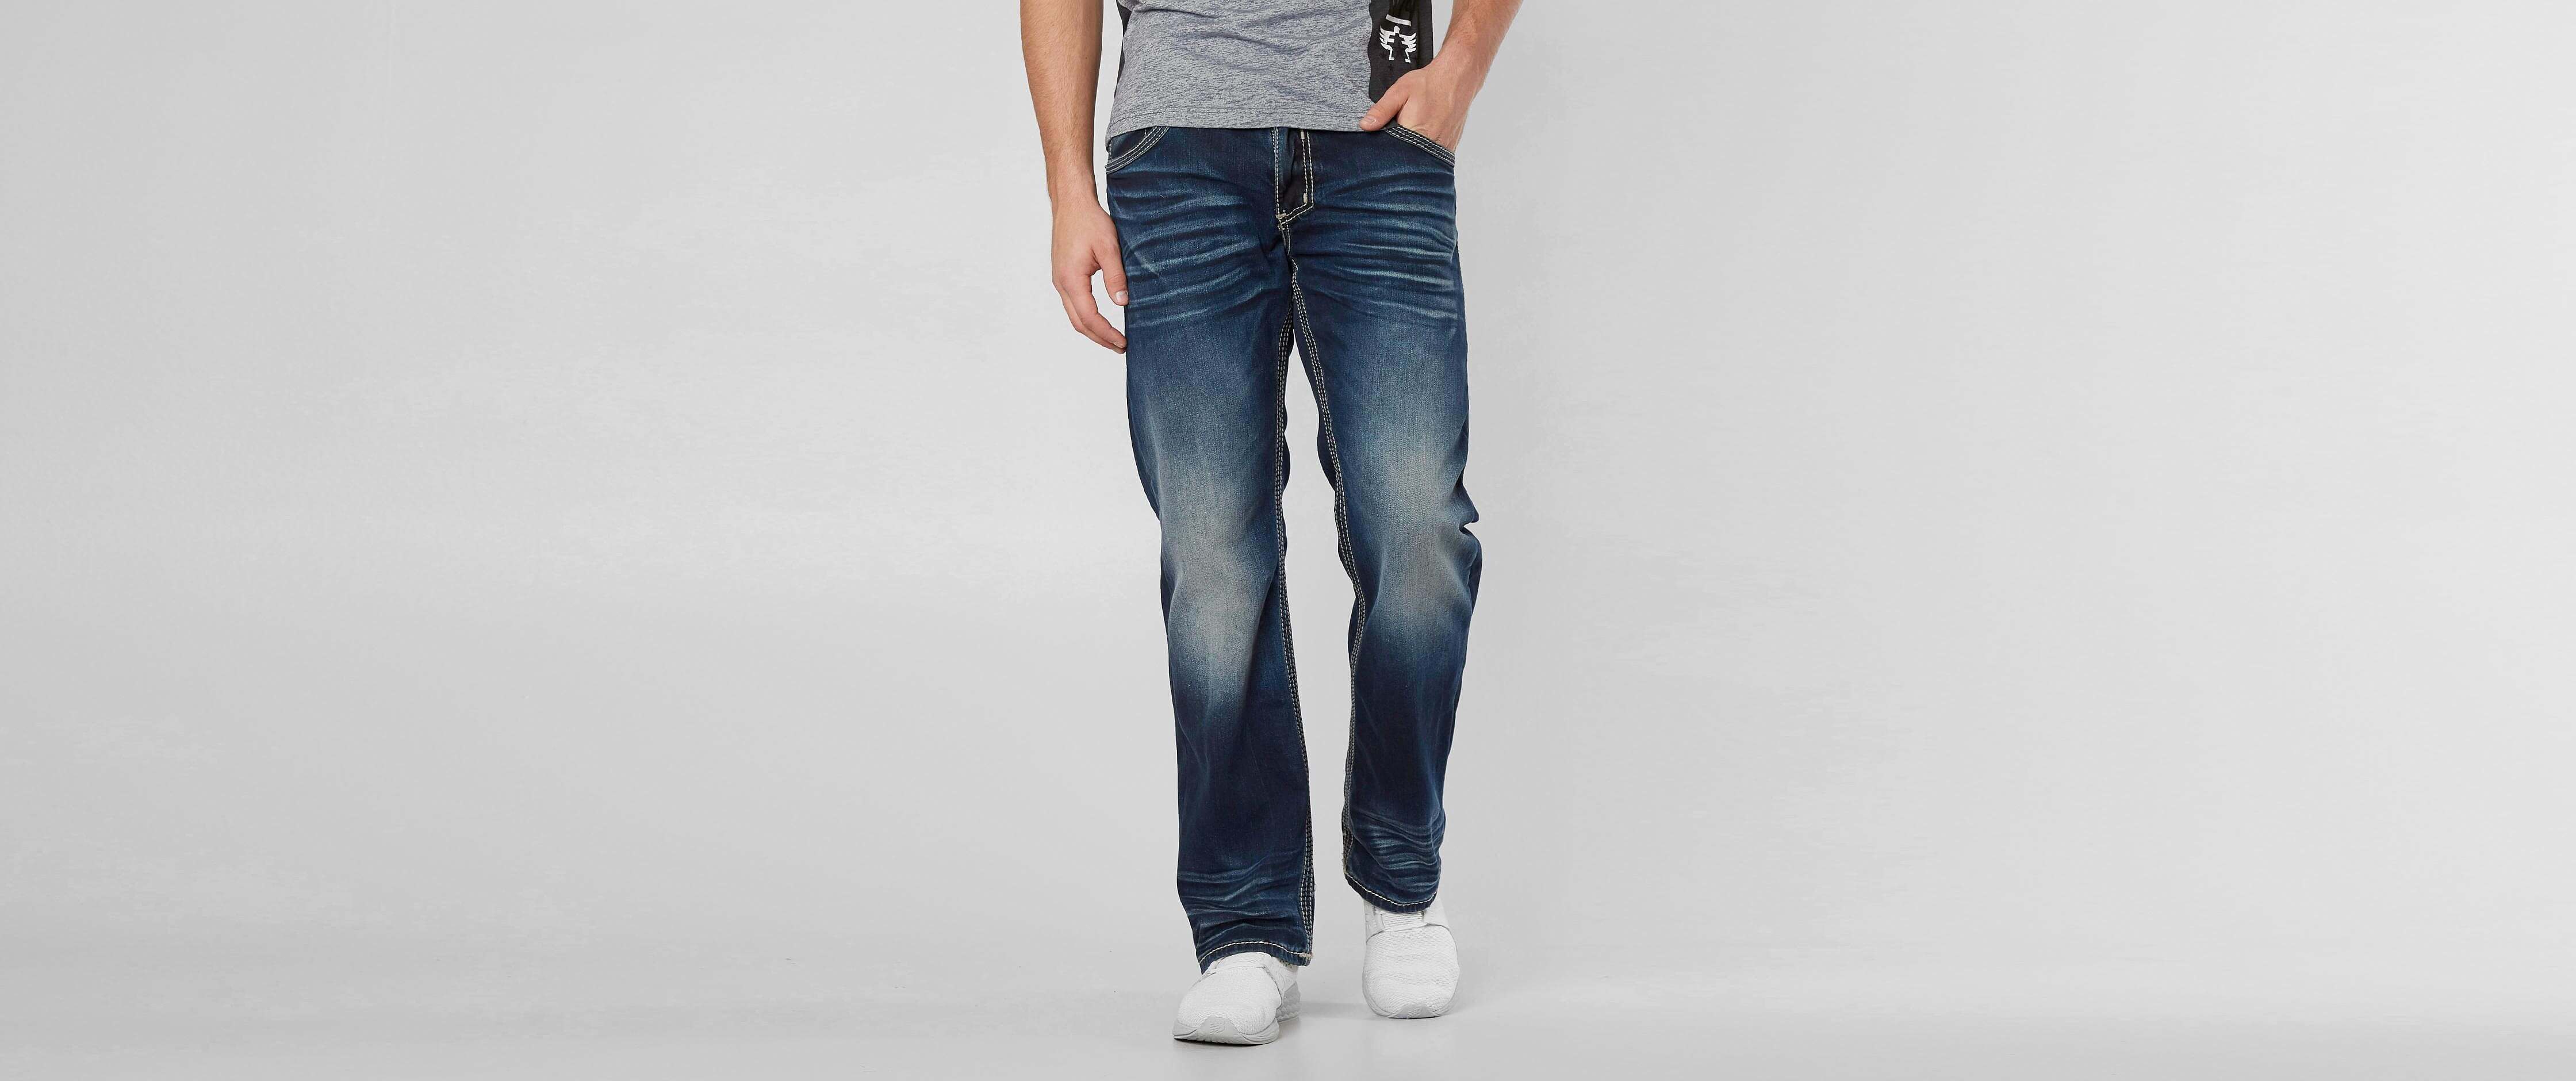 american fighter jeans bootcut